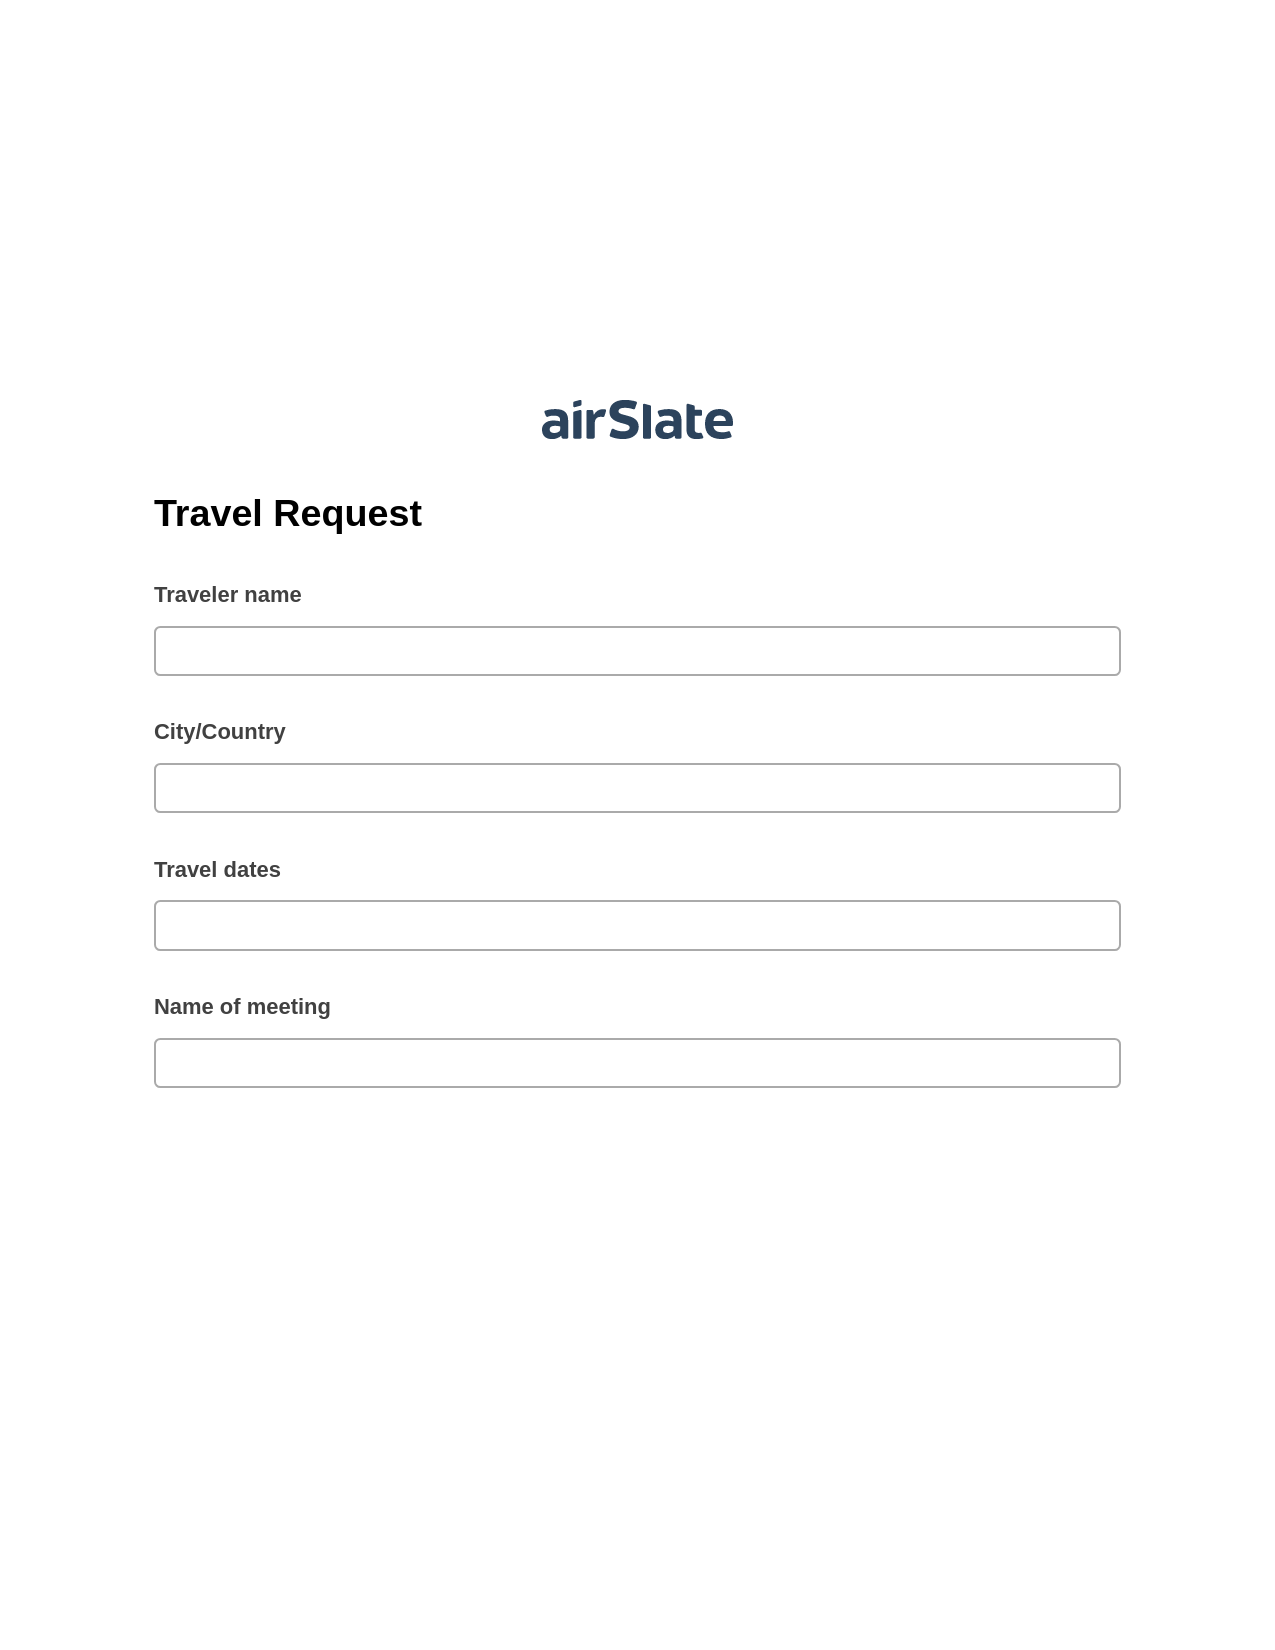 Travel Request Pre-fill Dropdown from Airtable, Create Salesforce Record Bot, Post-finish Document Bot